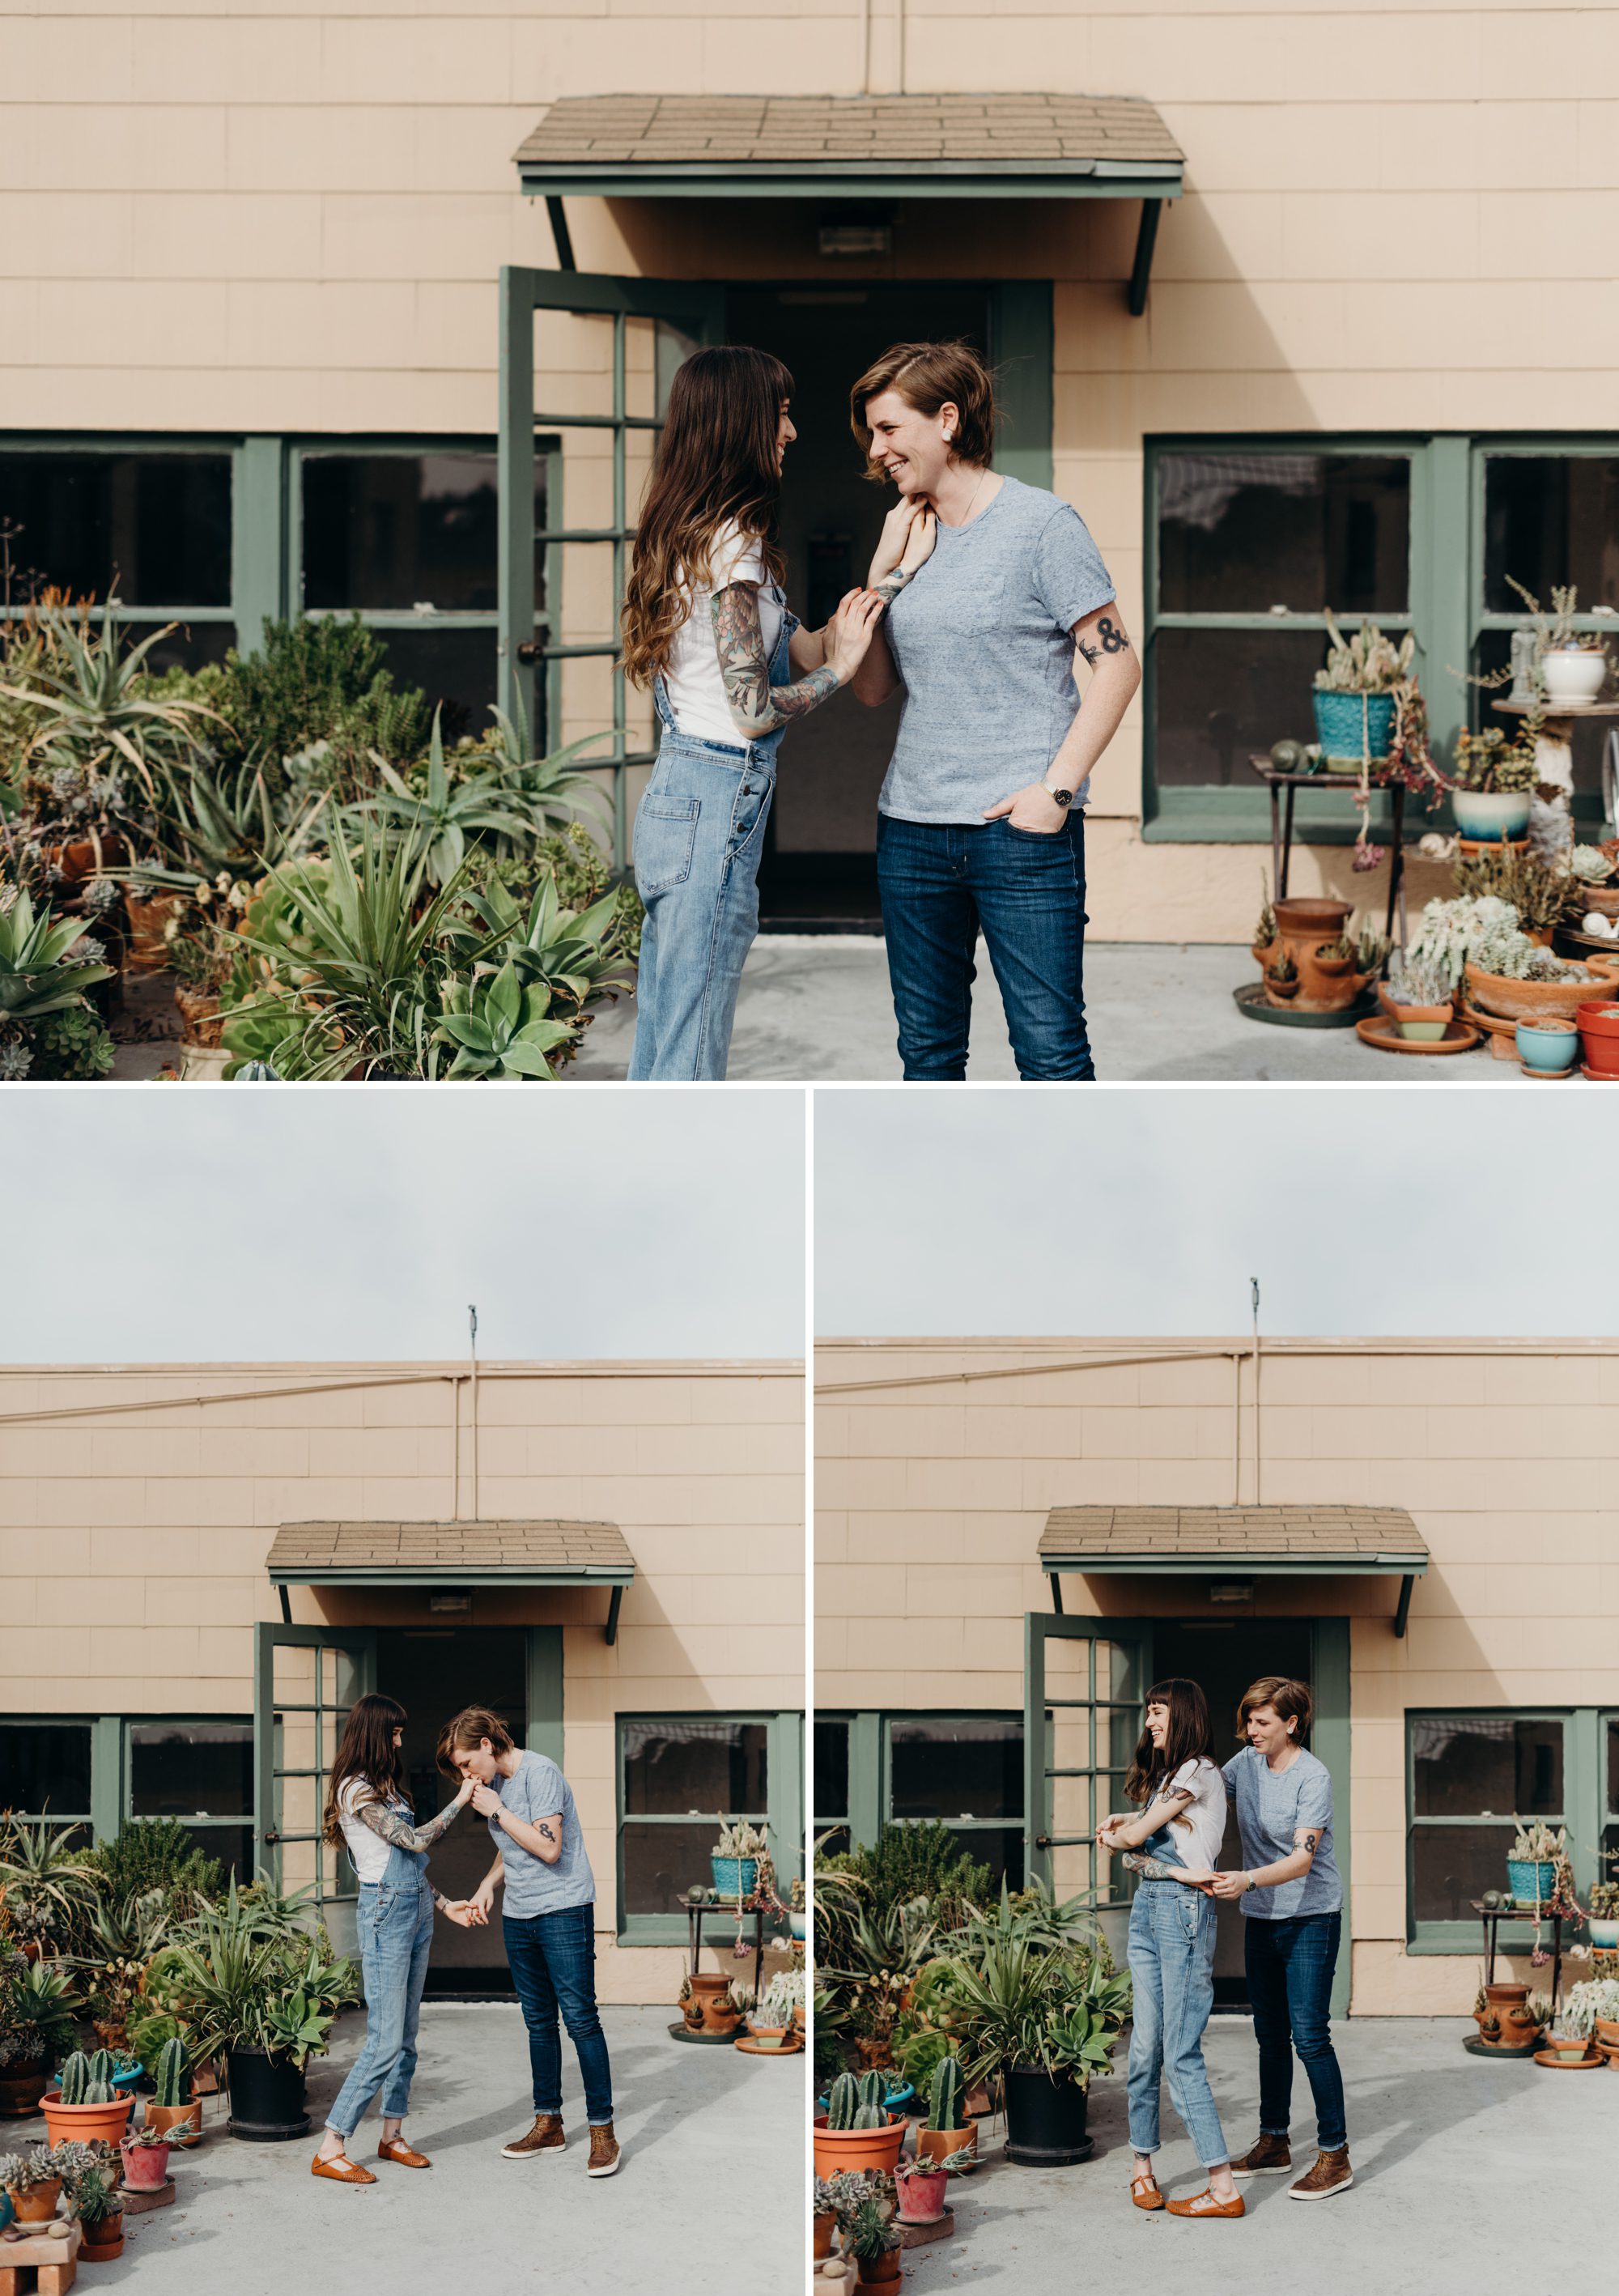 All the cutes with this sweet couple on their rooftop garden. By North Park San Diego engagement photographer Briana Morrison.